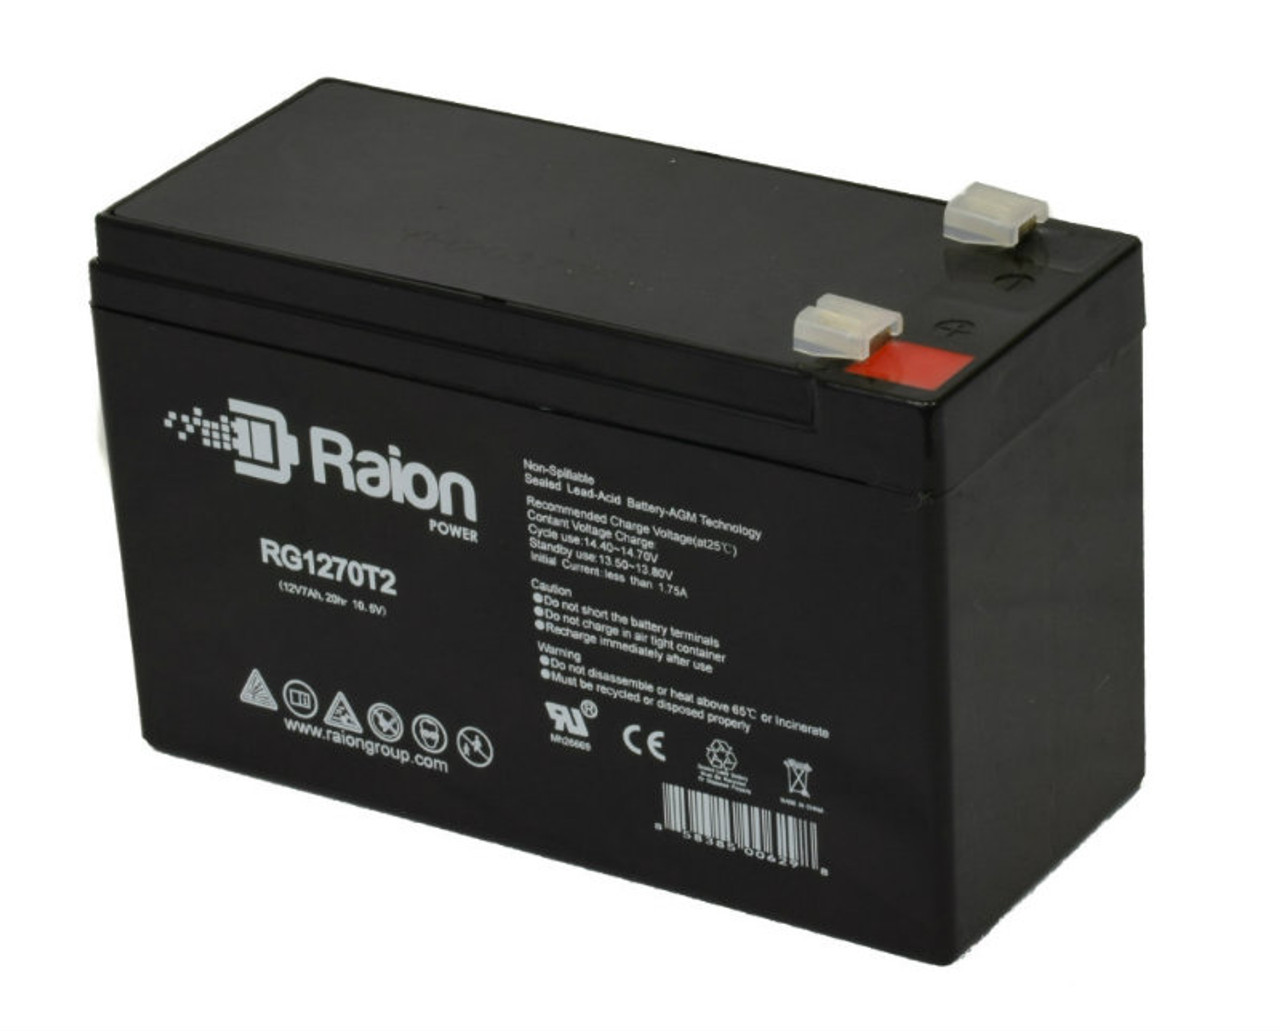 Raion Power RG1270T1 12V 7Ah Non-Spillable Replacement Battery for Union MX-12070 F1